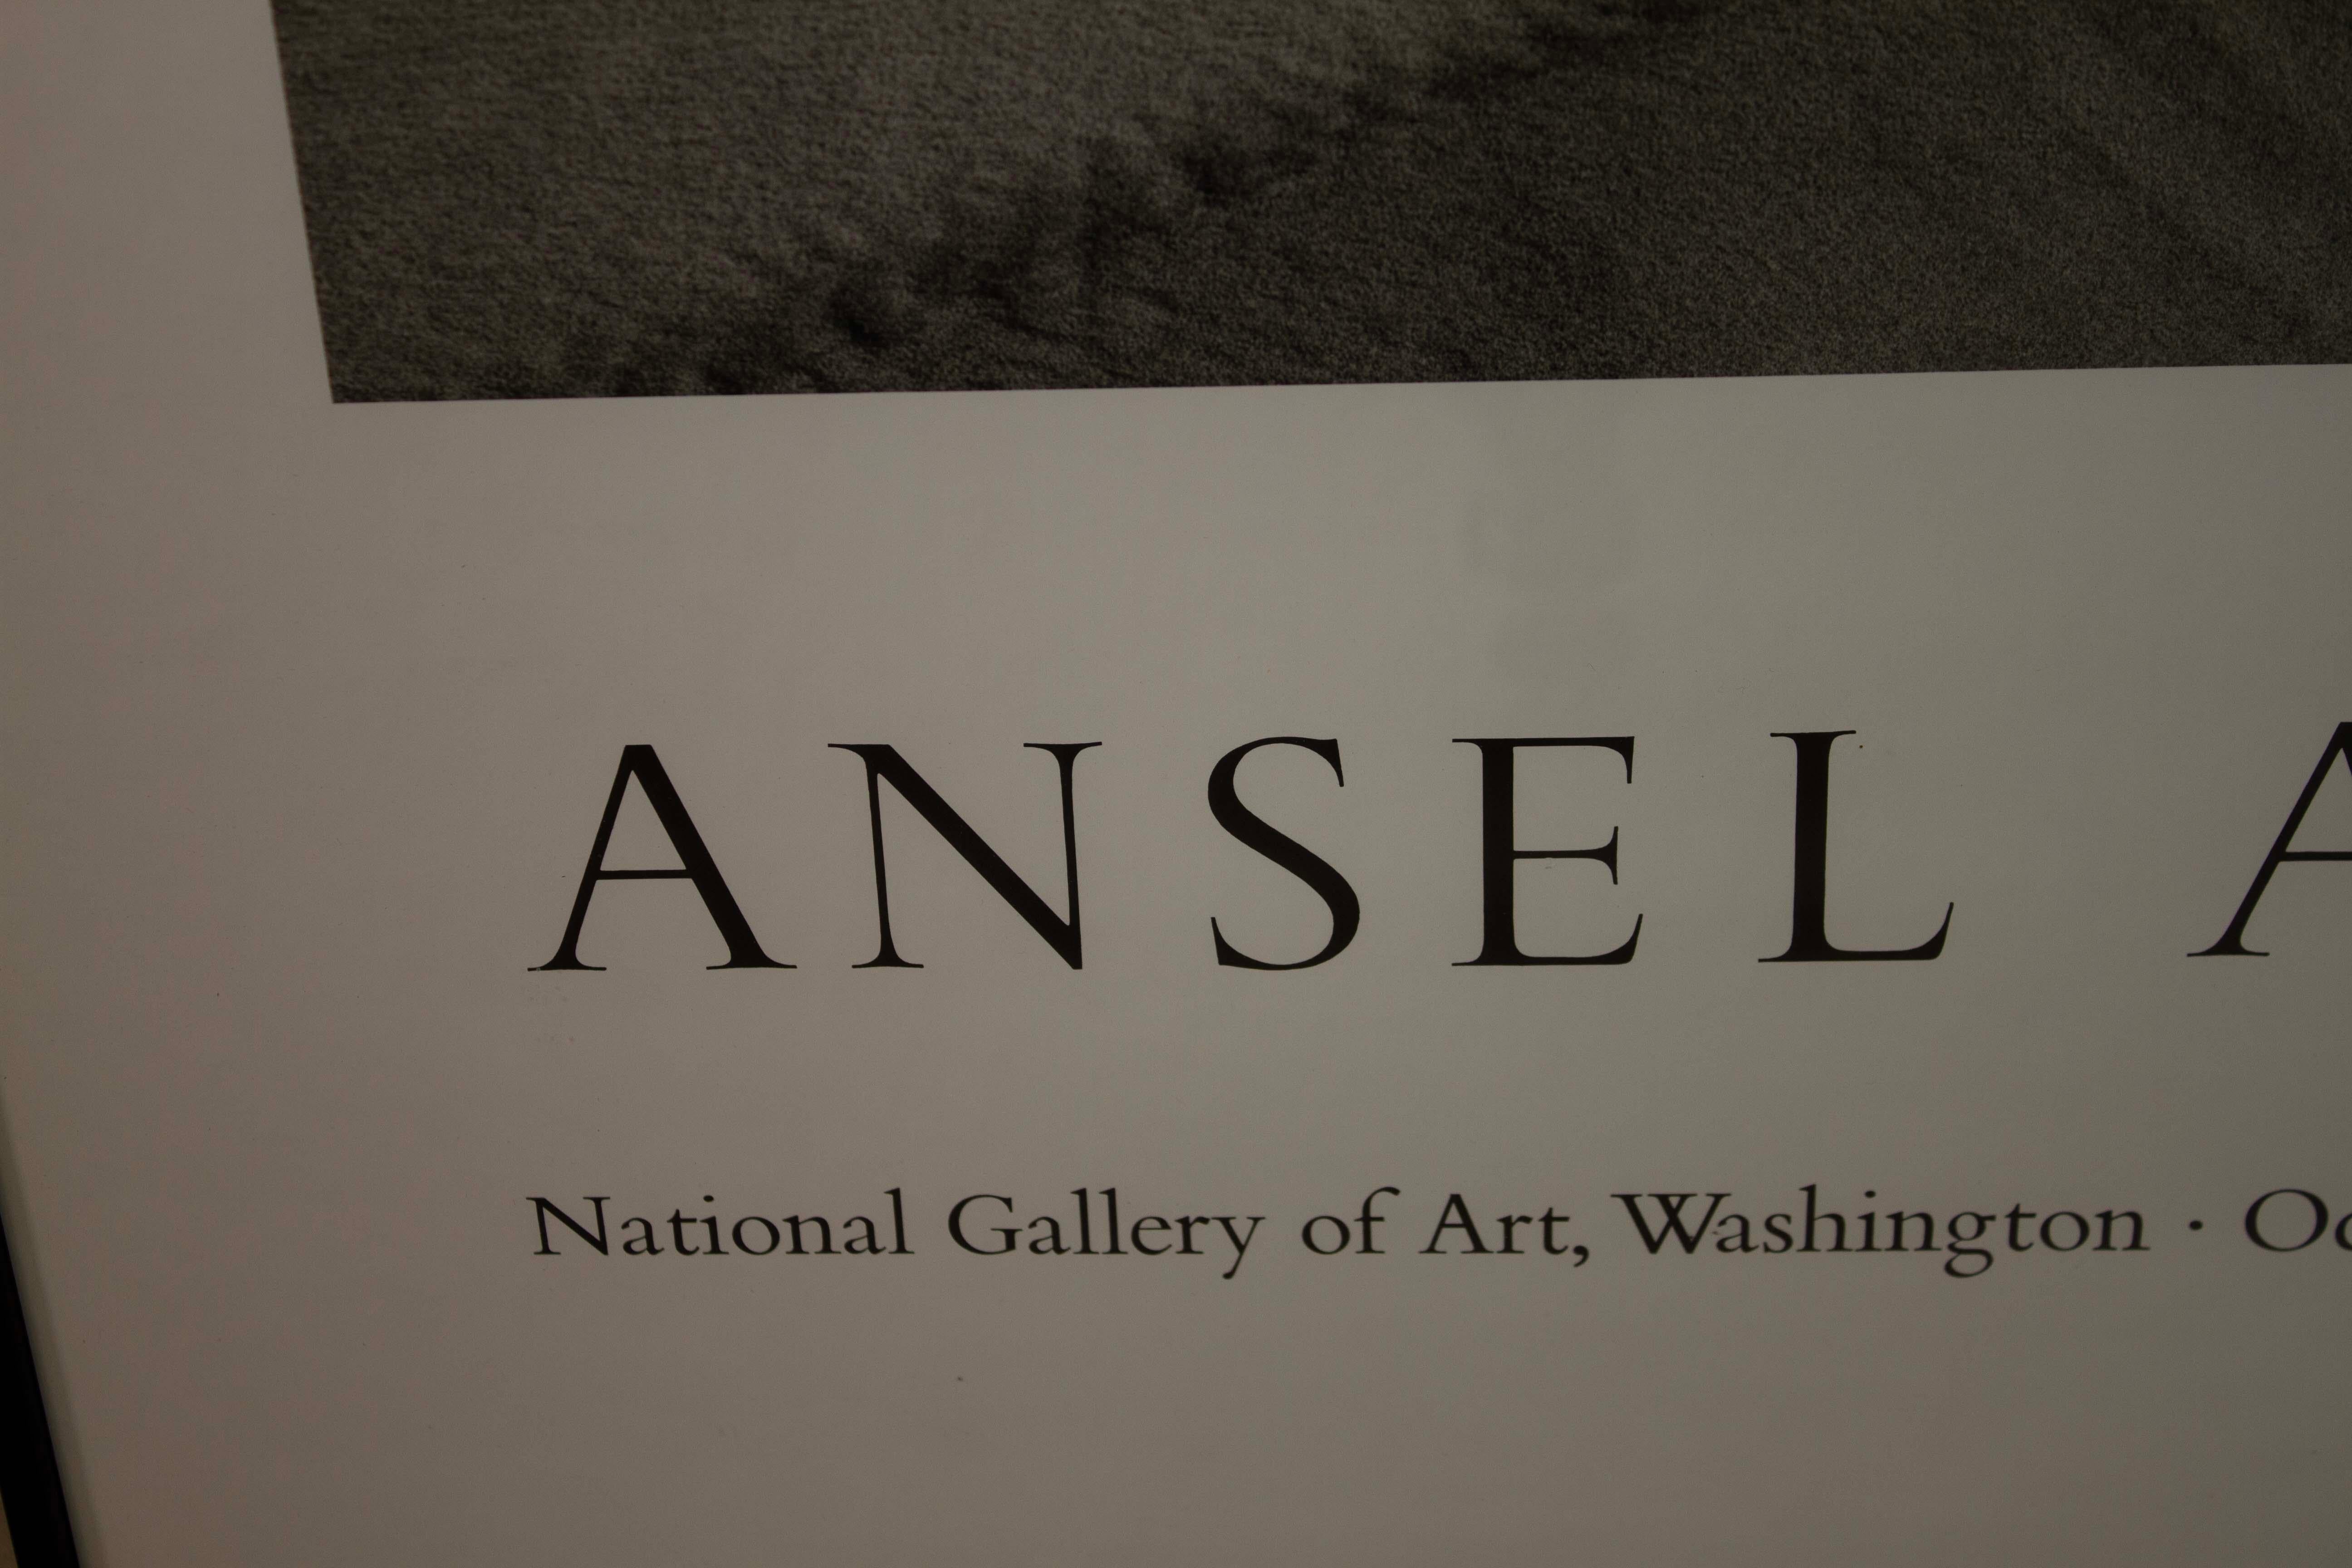 Ansel Adams Vintage National Gallery of Art 1985/86 Art Exhibition Poster Framed For Sale 1